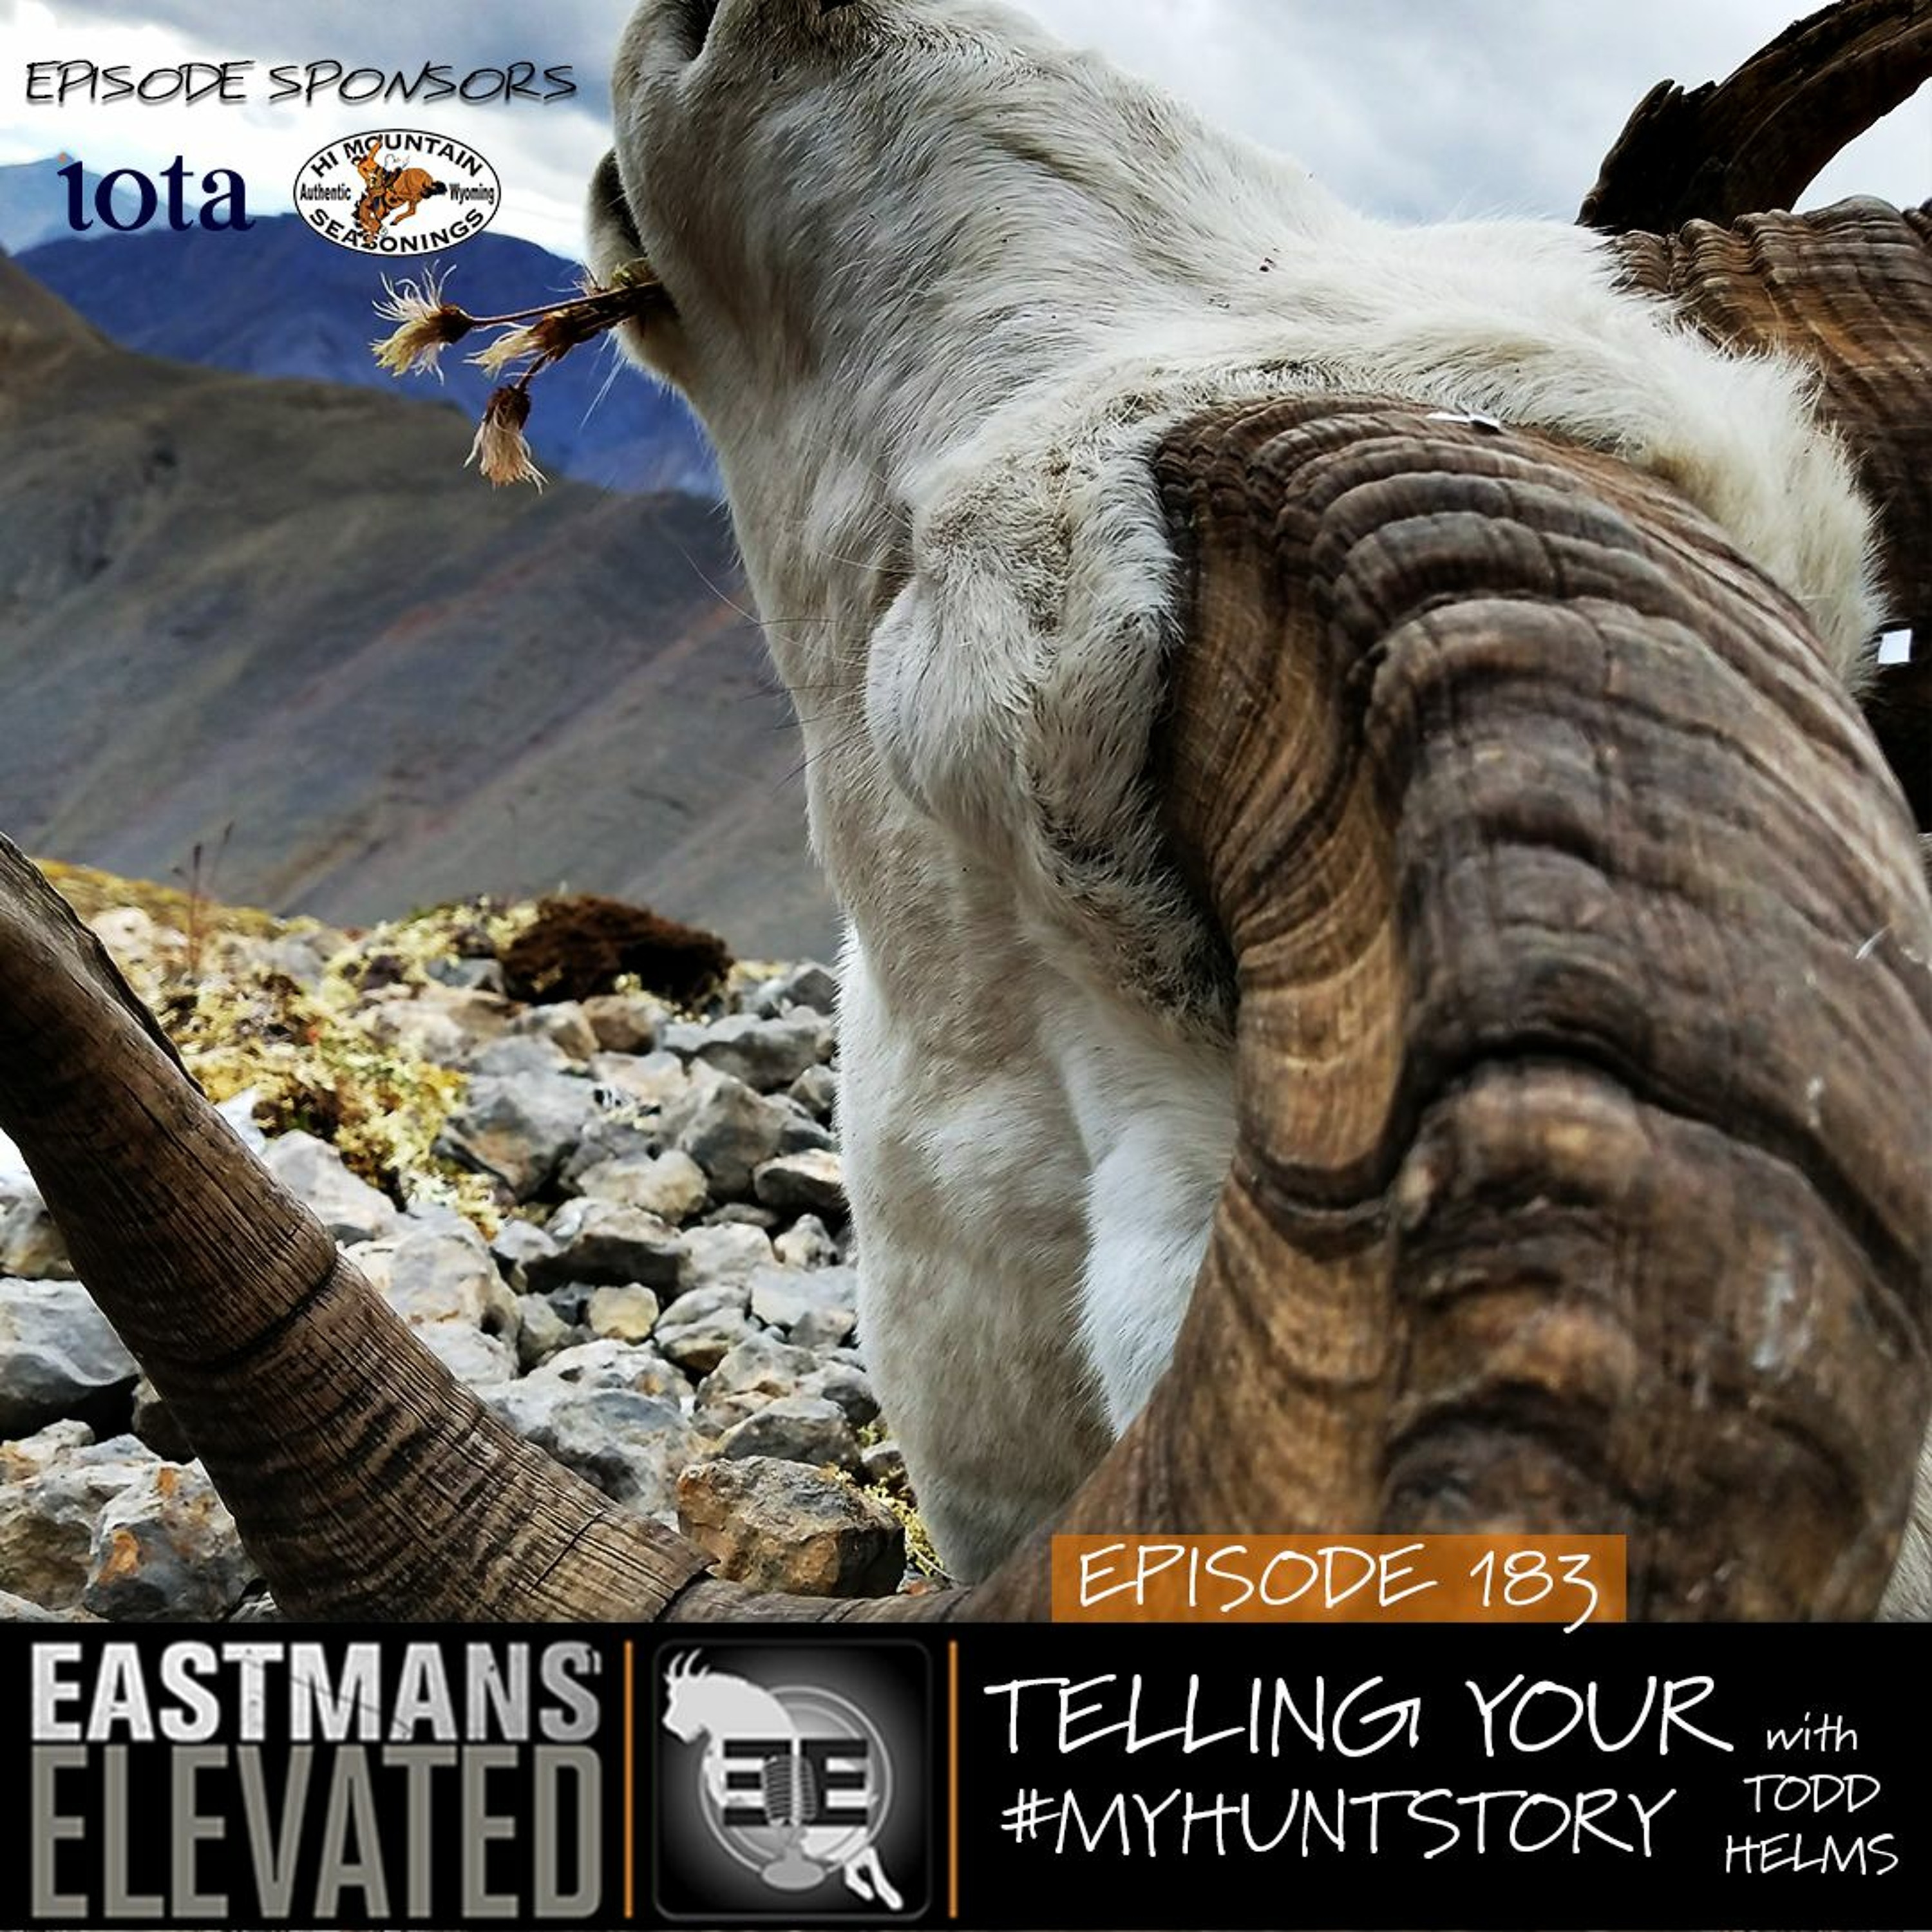 Episode 183: Telling Your #myhuntstory with Todd Helms